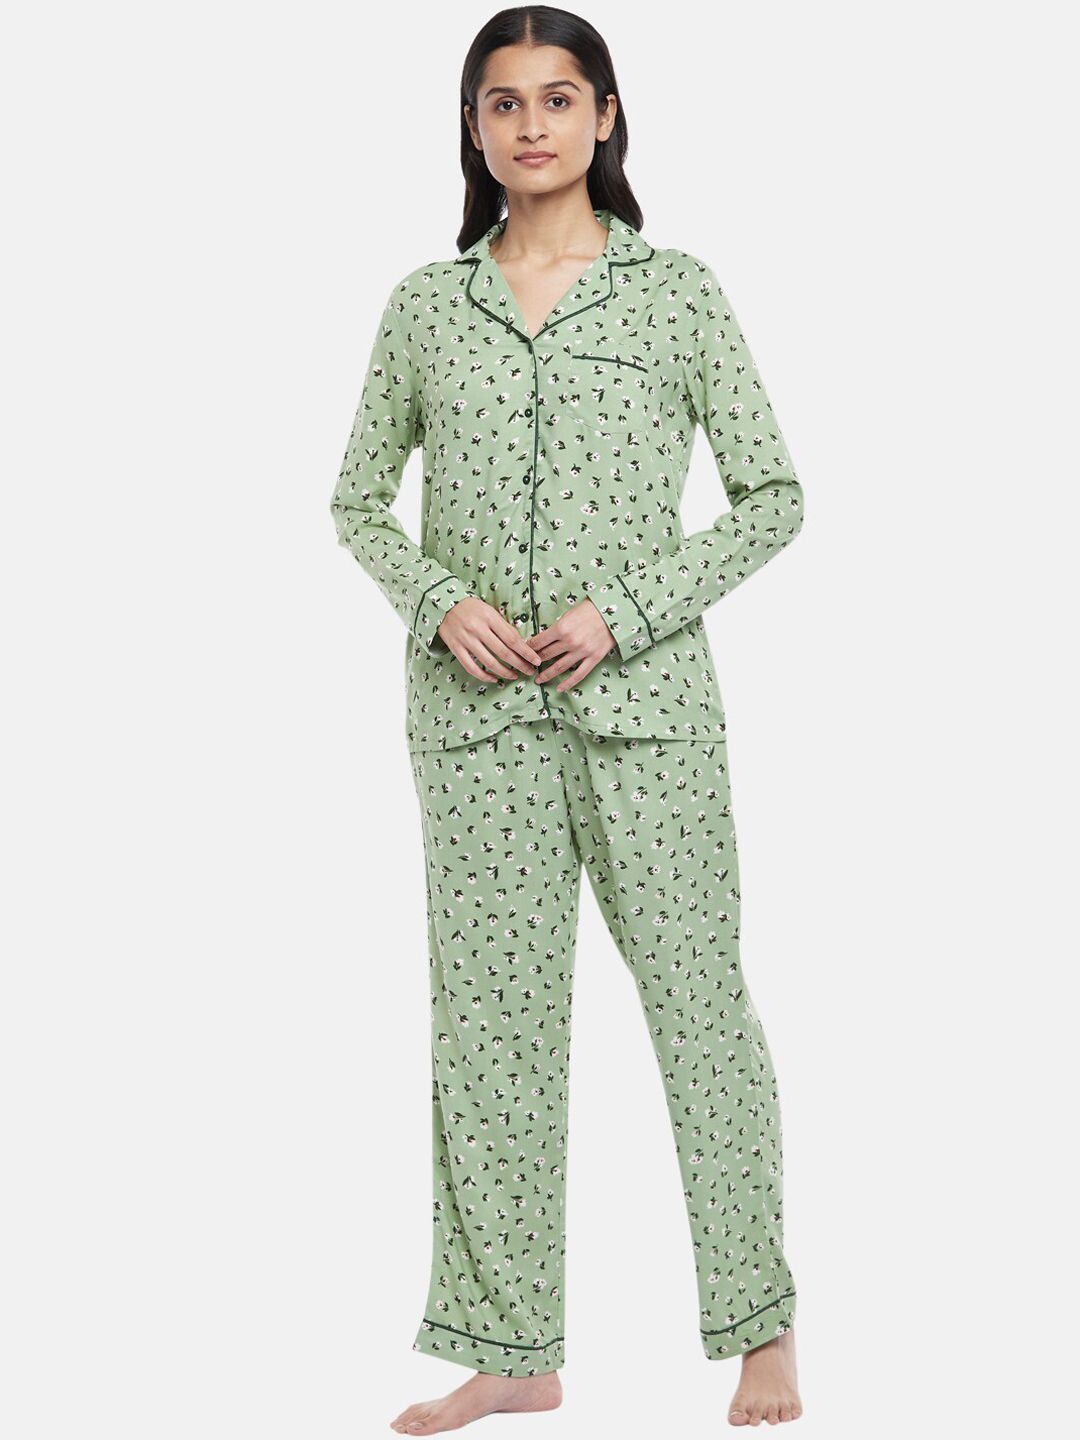 Dreamz by Pantaloons Women Green & White Printed Night suit Price in India